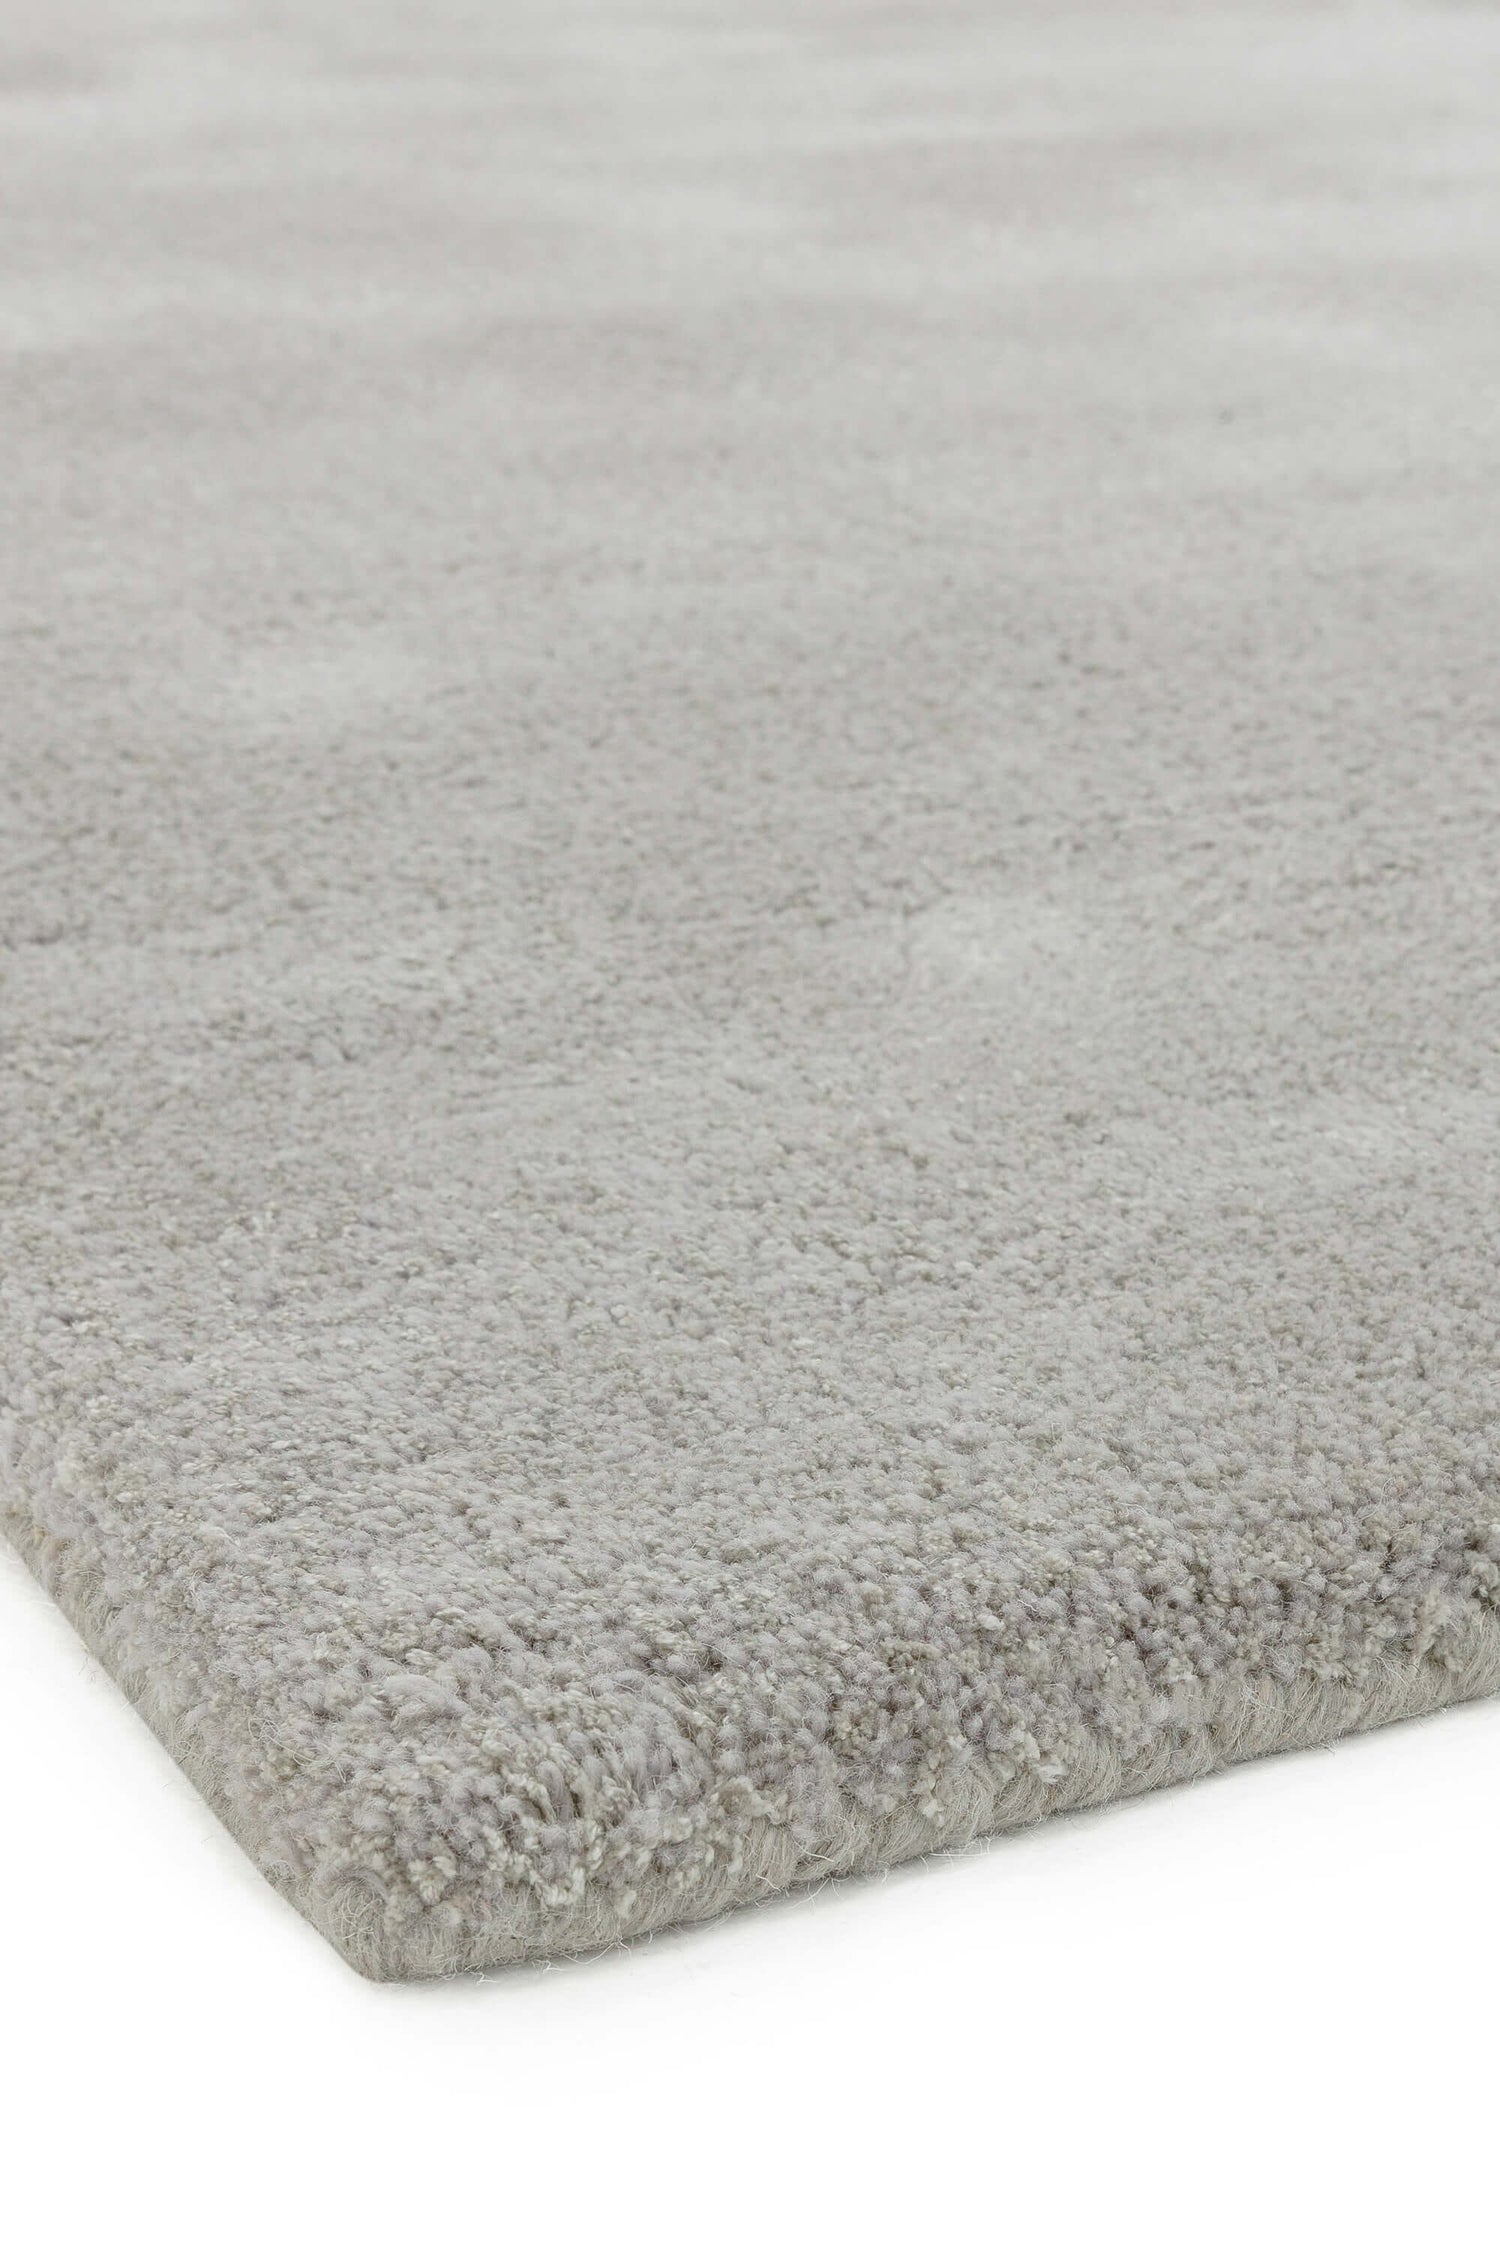  Asiatic Carpets-Asiatic Carpets Aran Hand Woven Rug Feather Grey - 120 x 180cm-Grey, Silver 677 